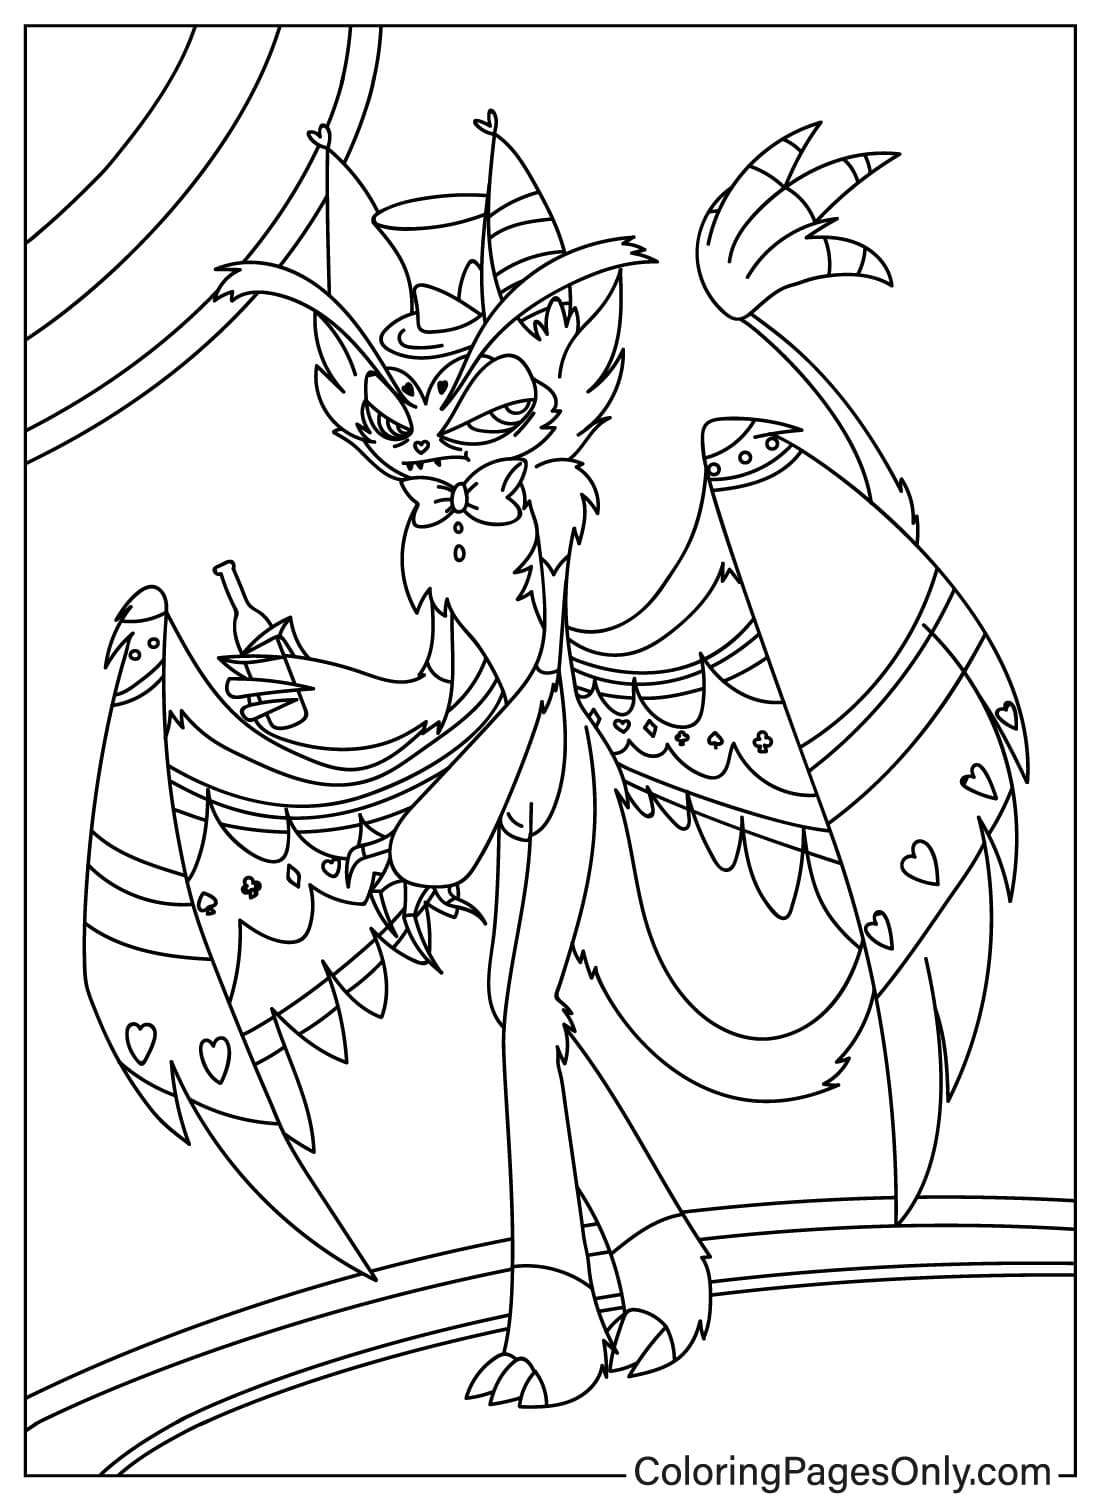 Husk Coloring Page Free from Husk